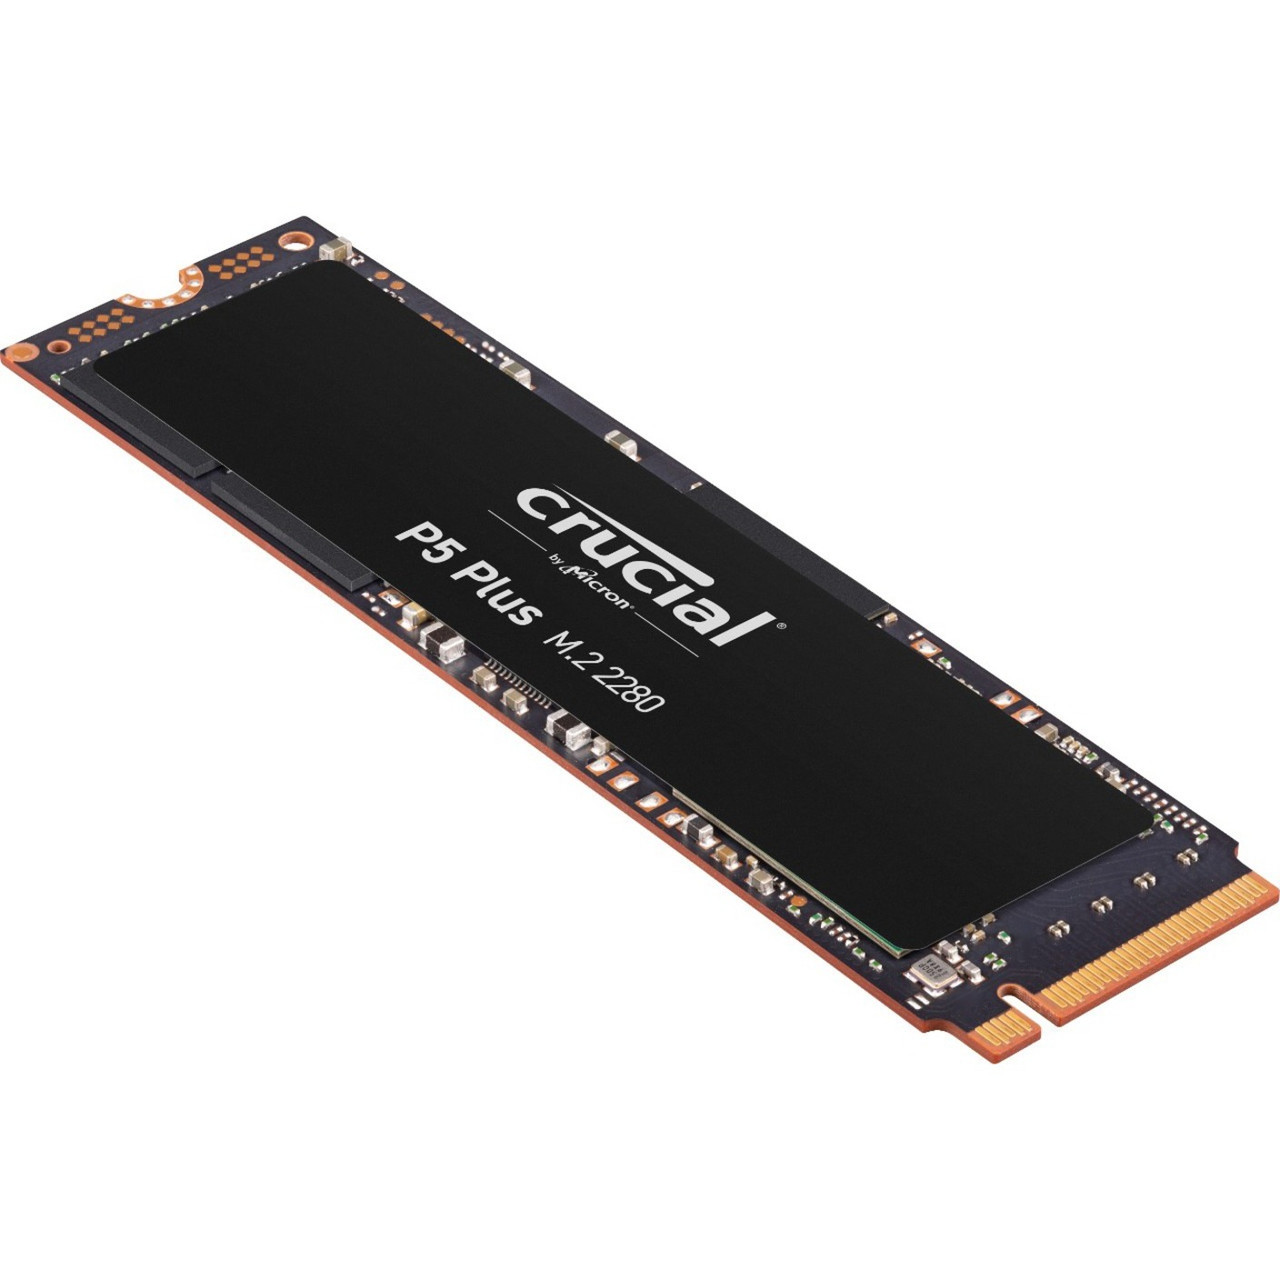 Crucial P5 Plus CT2000P5PSSD8T 2 TB Solid State Drive - M.2 2280